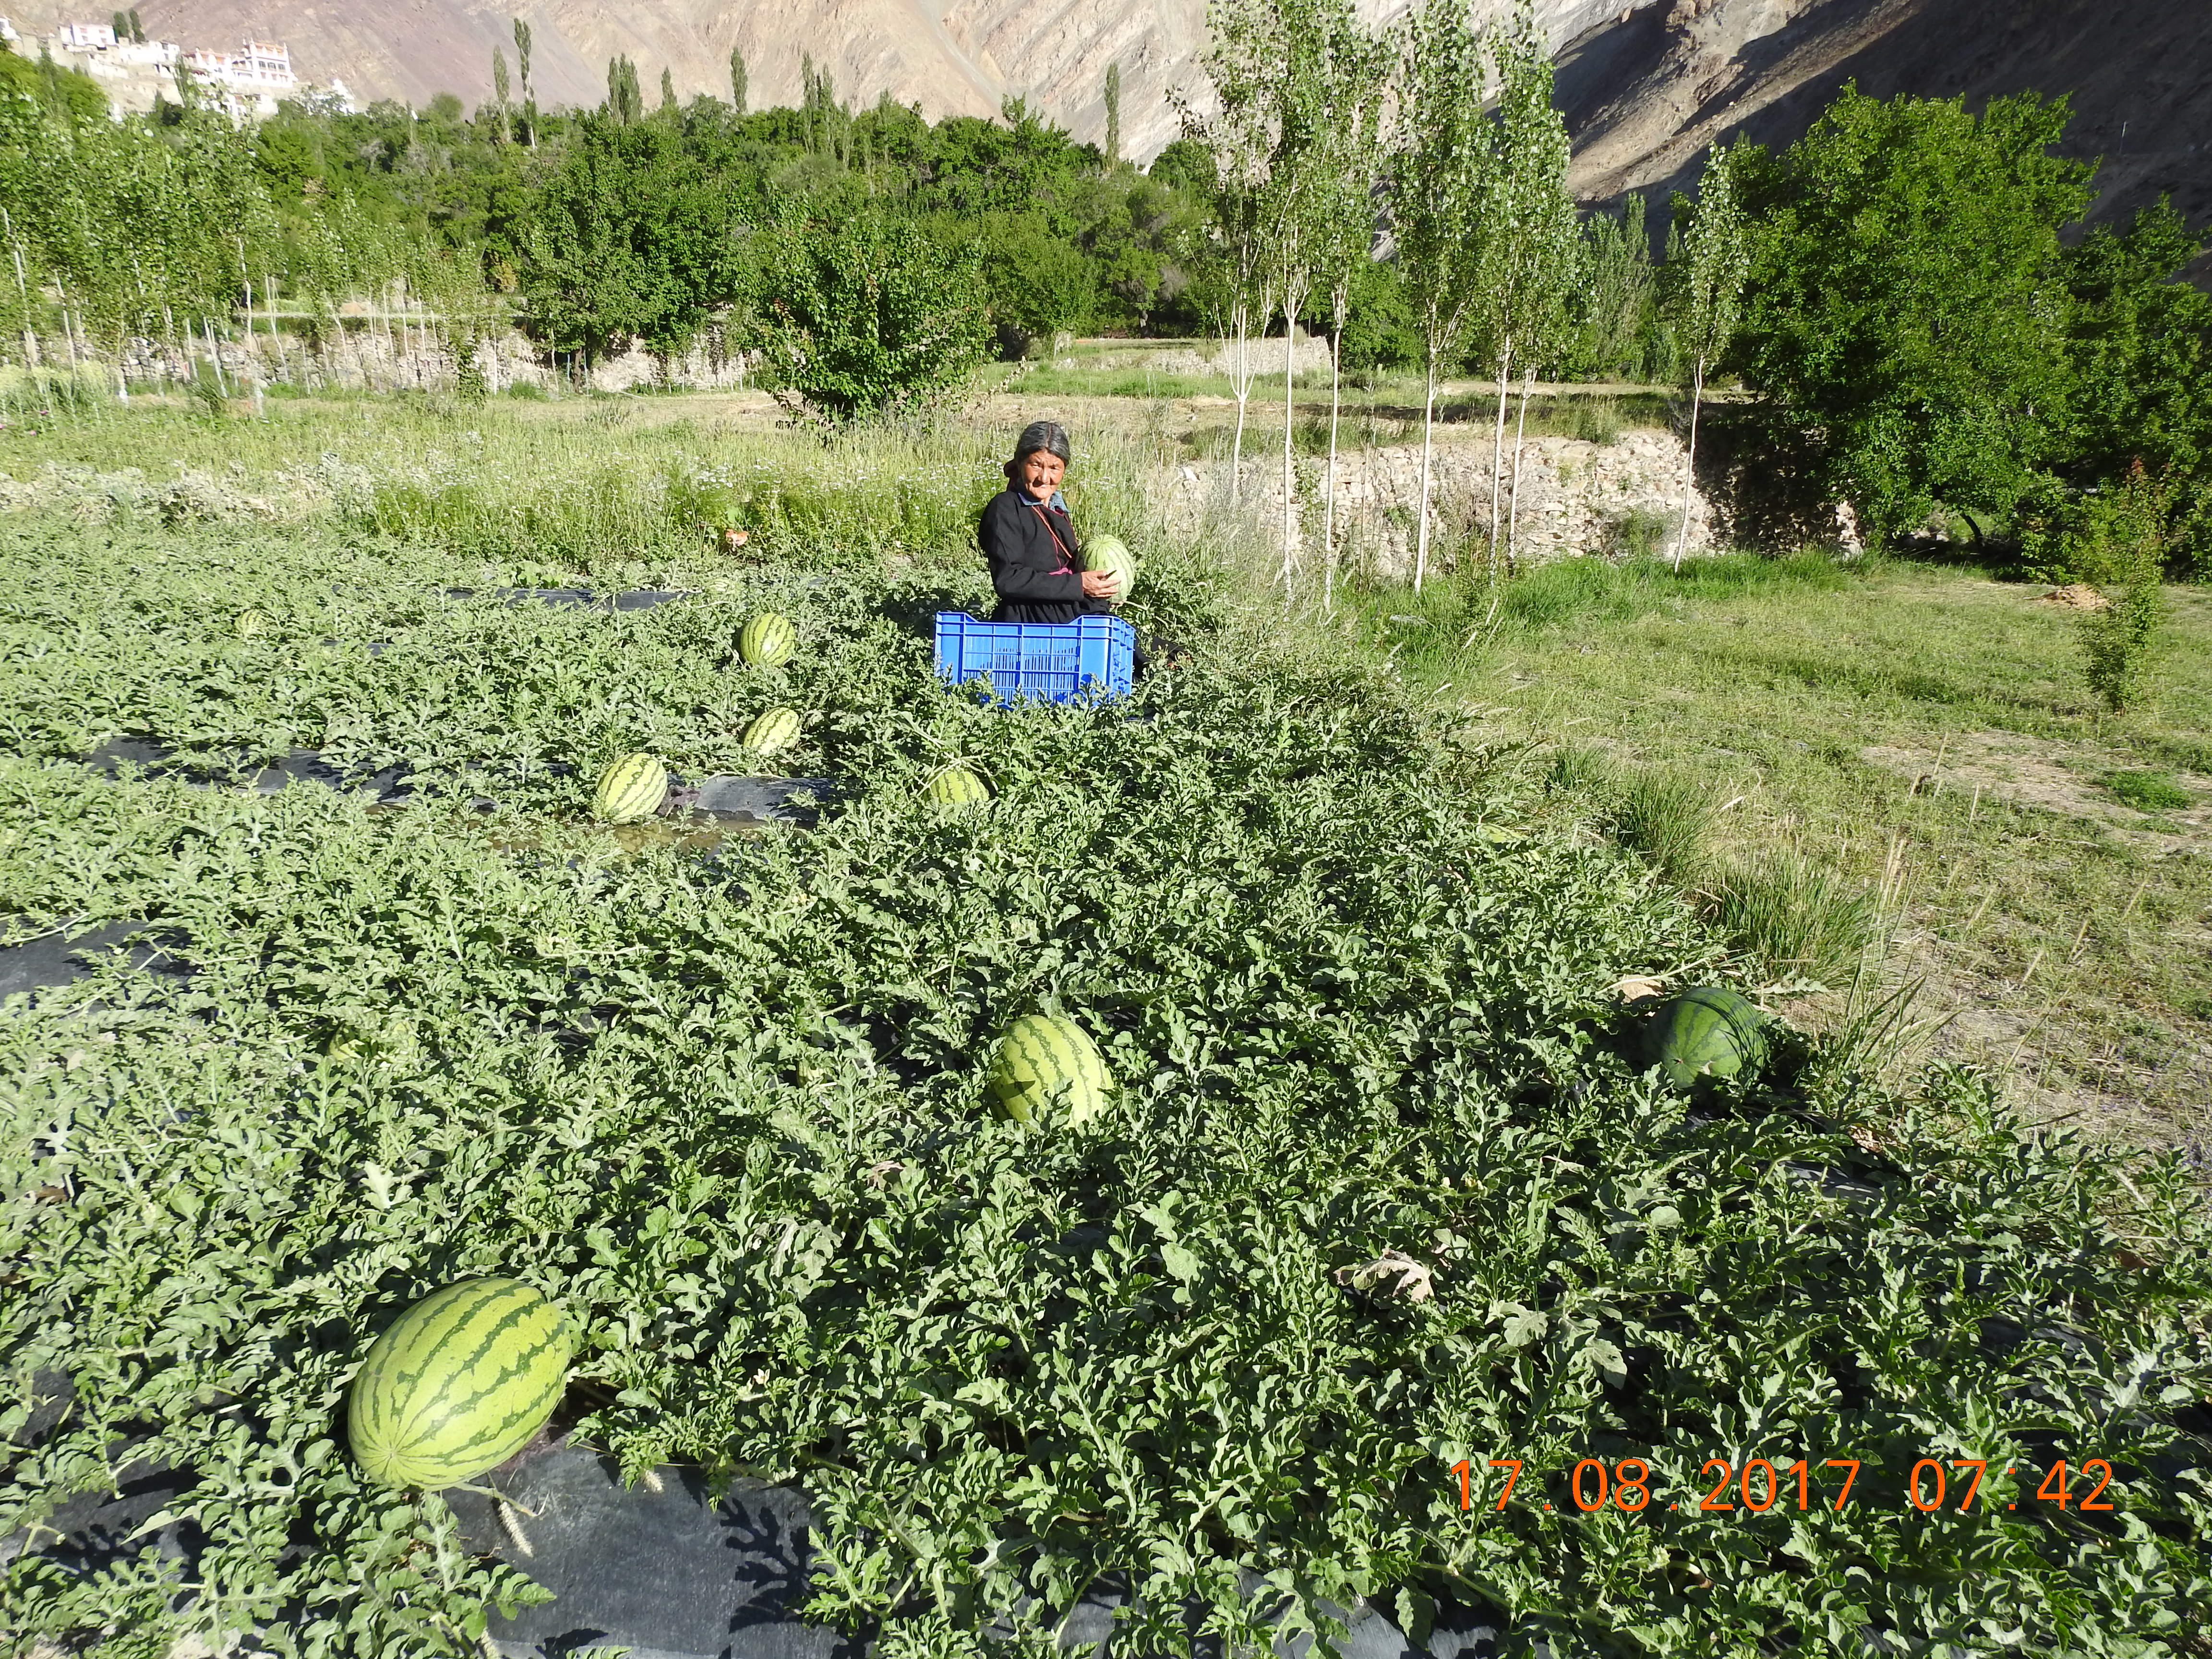 Growing watermelons in the cold desert of Ladakh. (Source: Dr Tsering Stobdan)